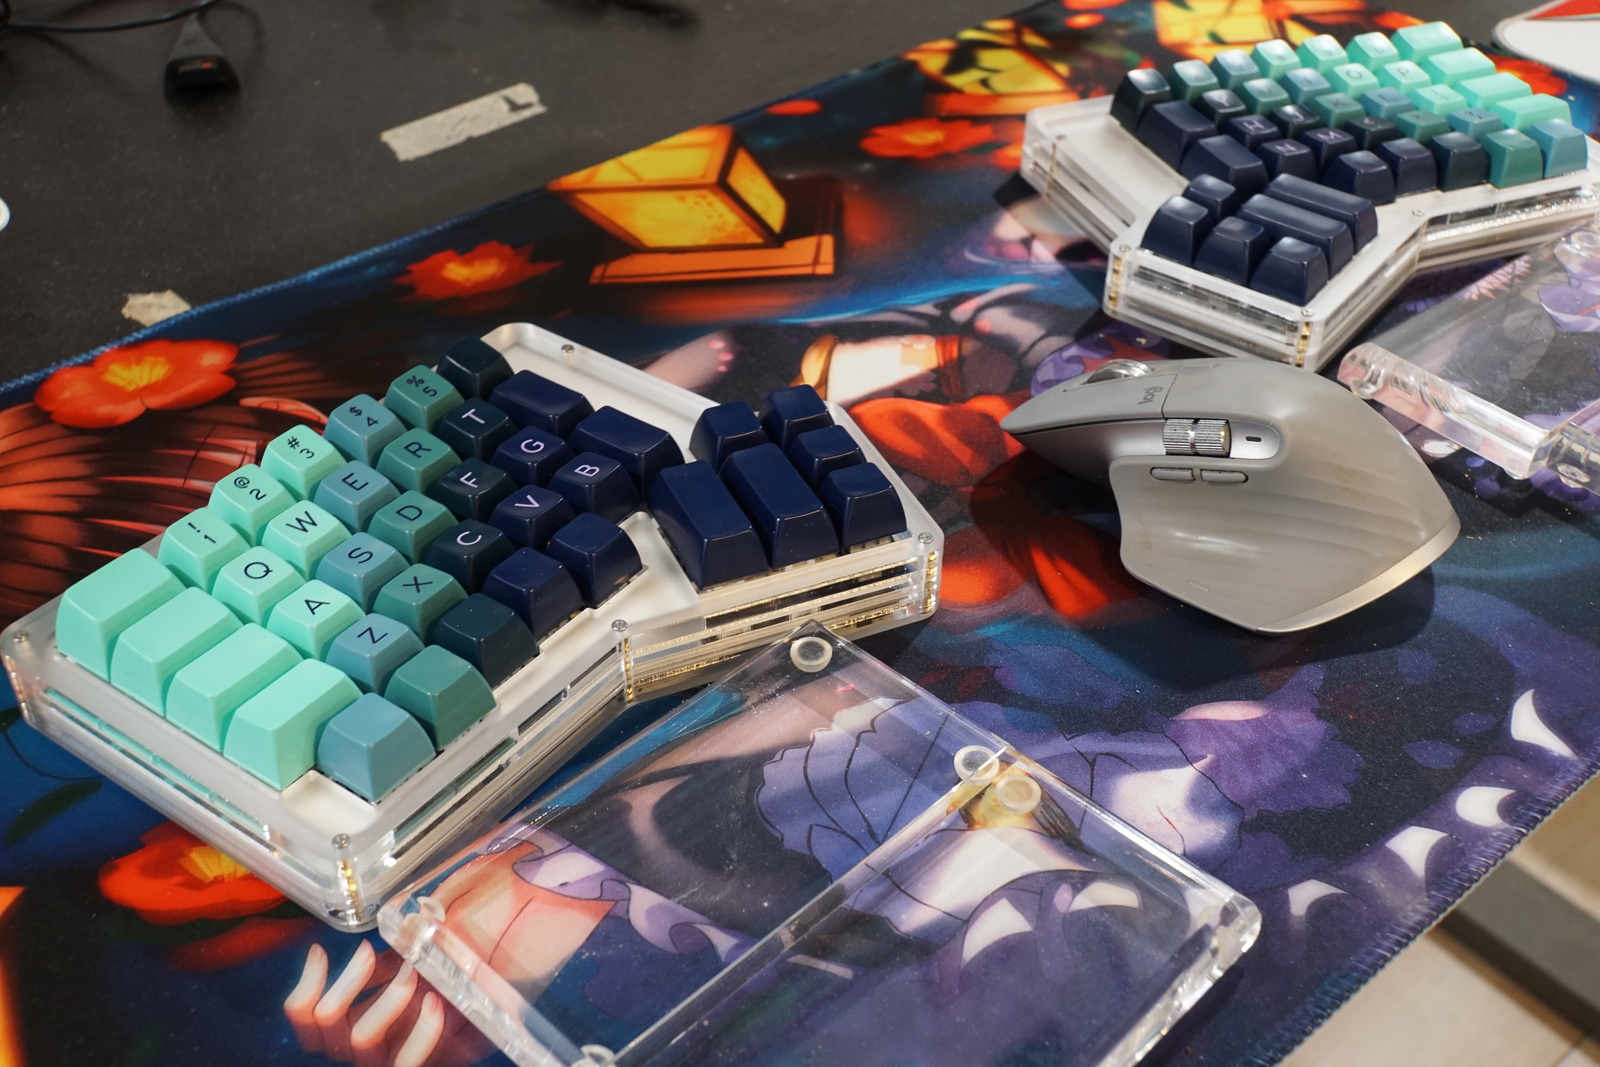 W-Ergo Keyboard fully assembled with keycaps, wrist rests and mouse on a deskmat